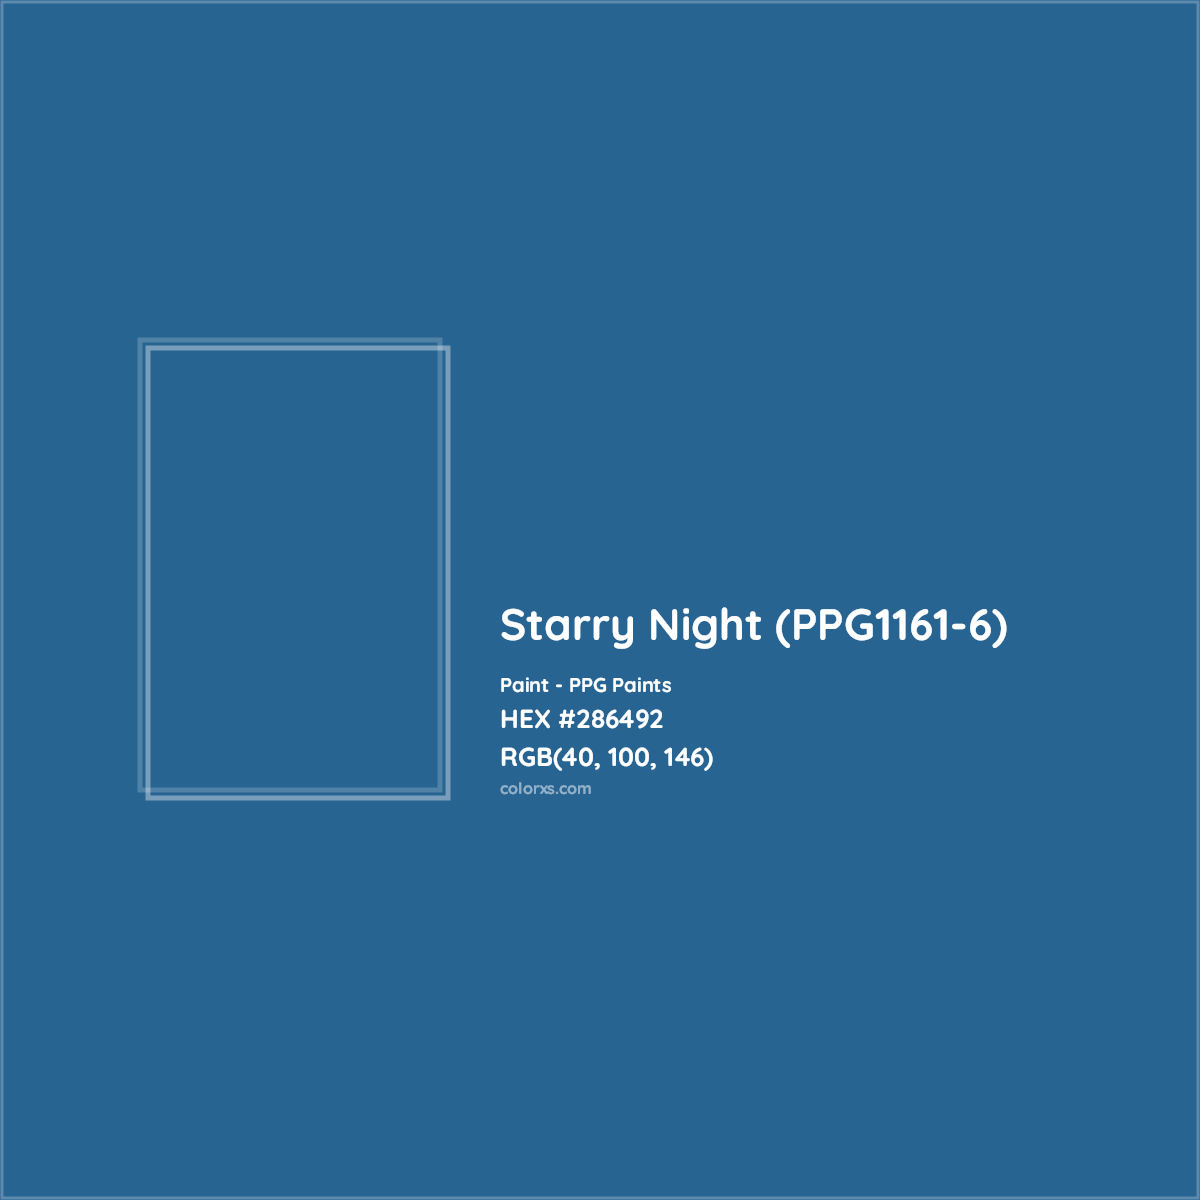 HEX #286492 Starry Night (PPG1161-6) Paint PPG Paints - Color Code